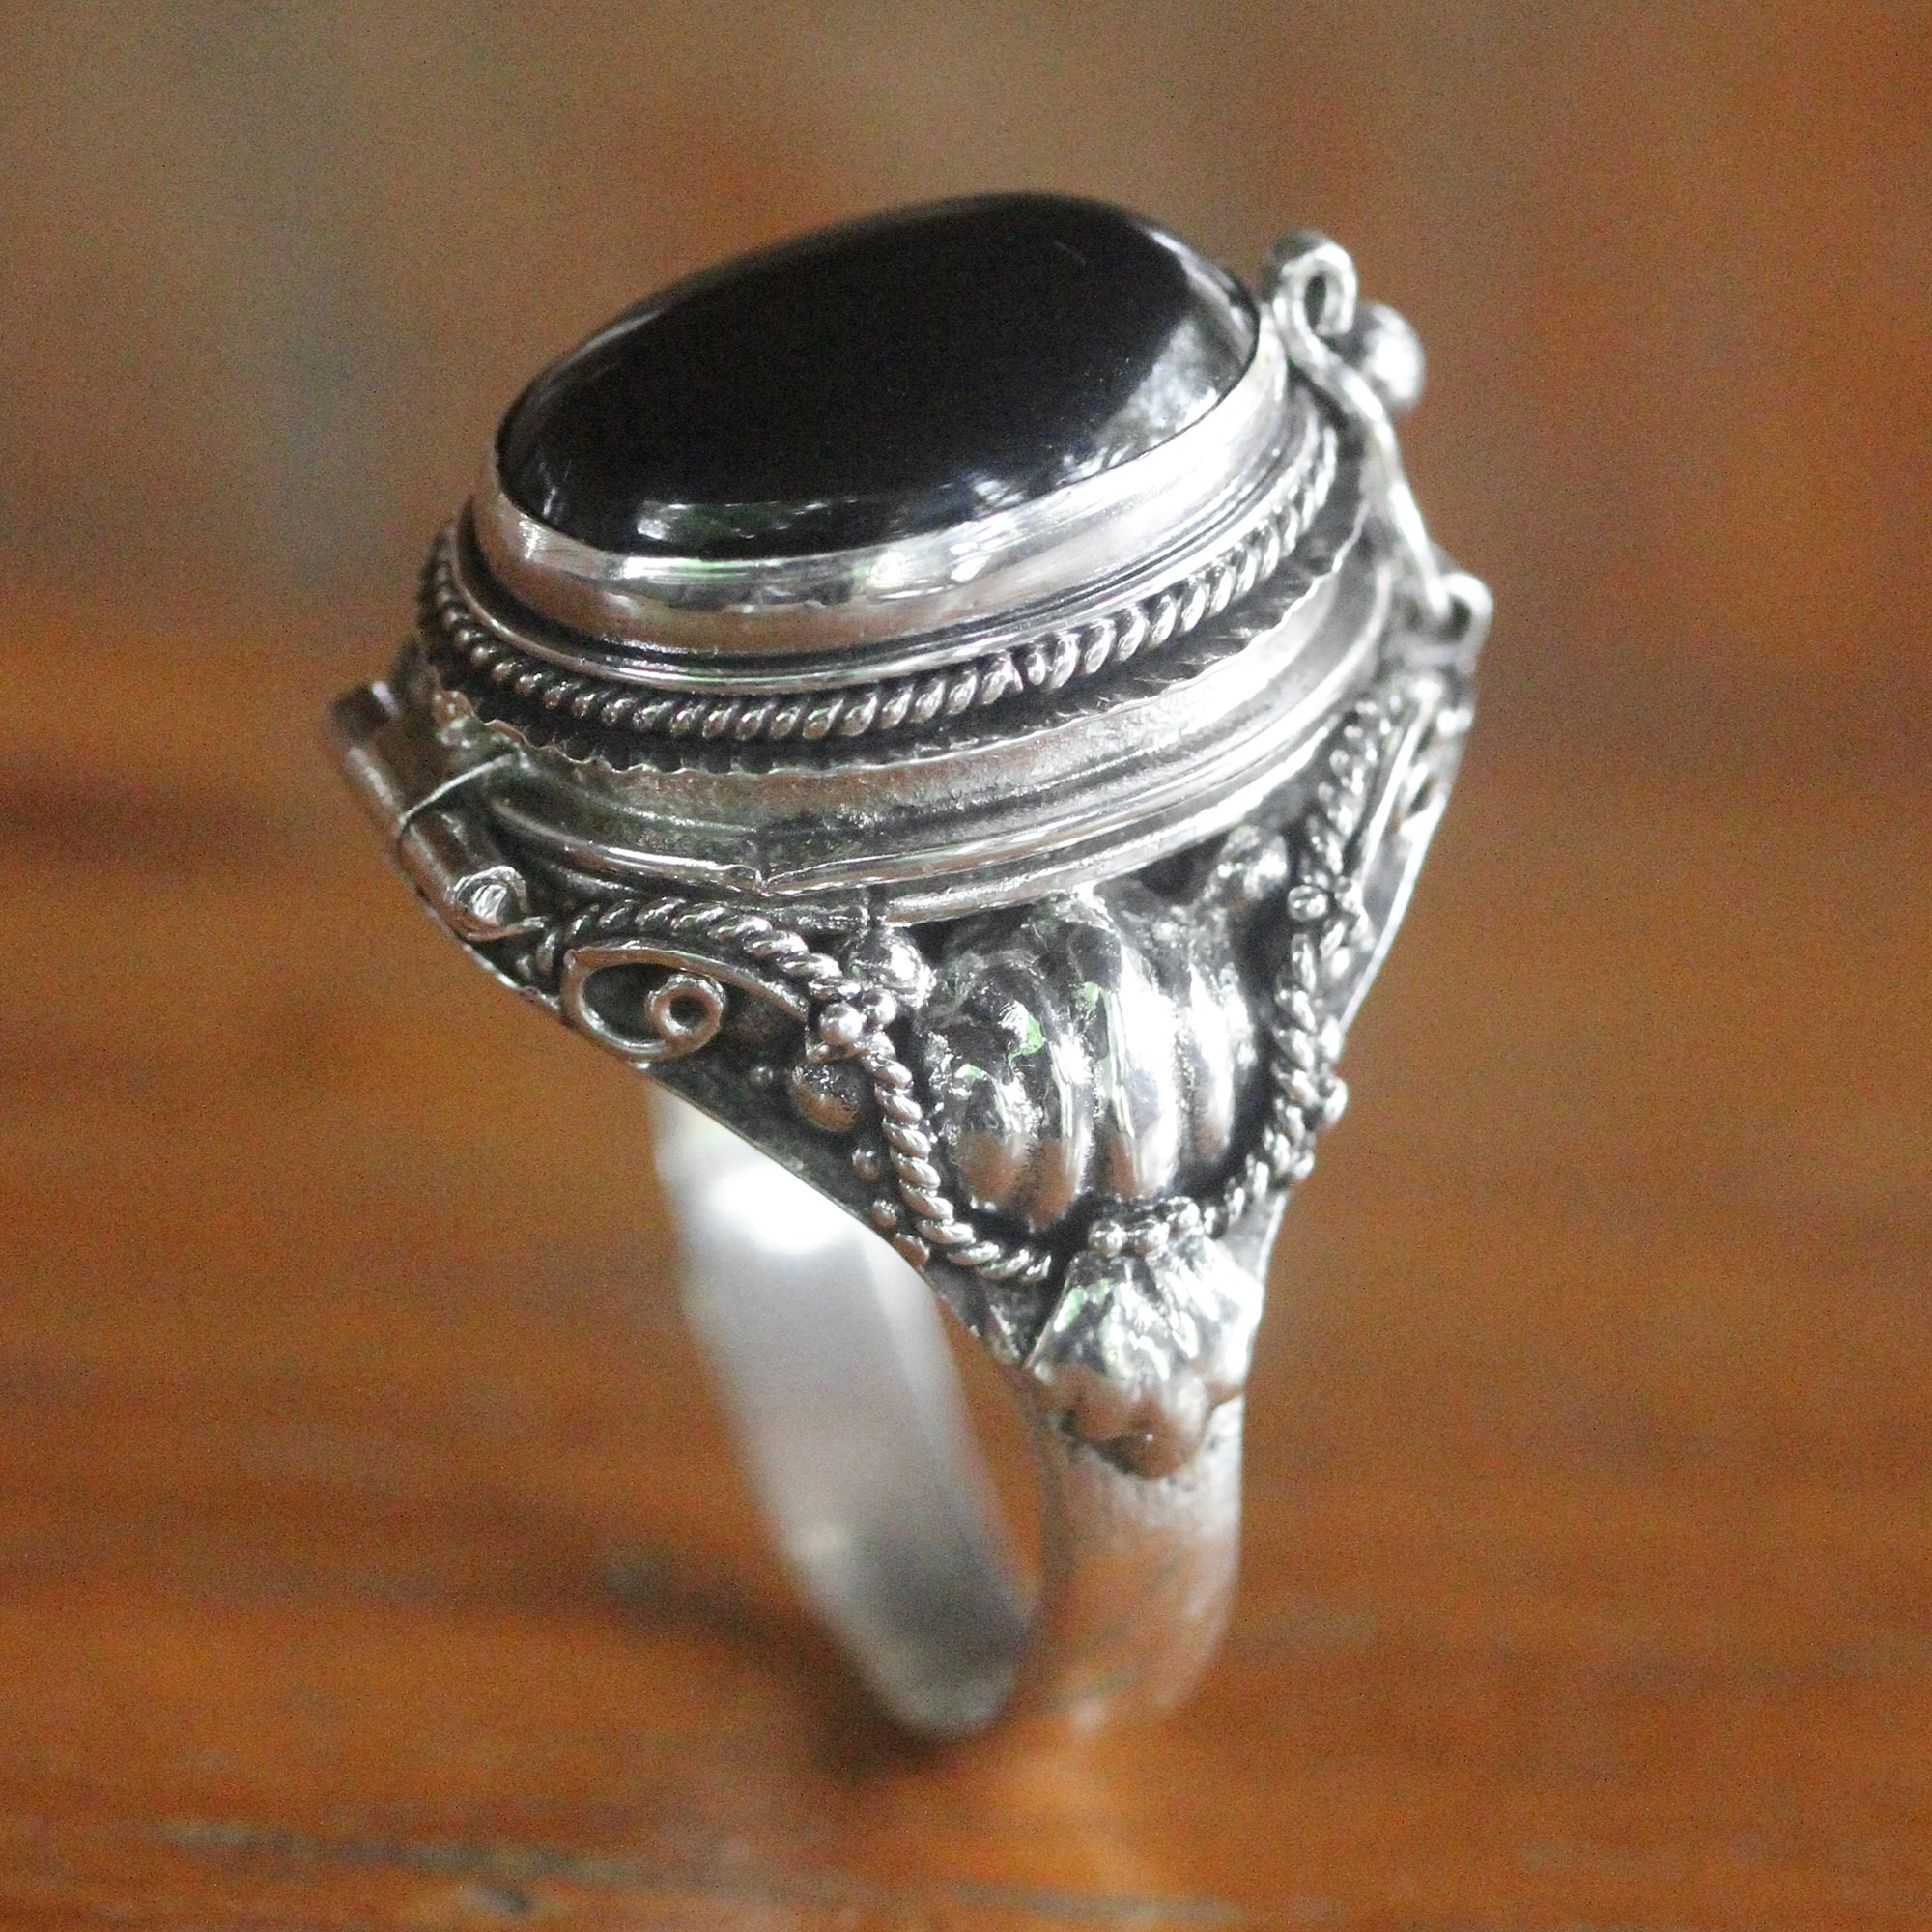 rust Victor Ook Sterling Silver Ring with Onyx Top Compartment - Goth Secrets | NOVICA